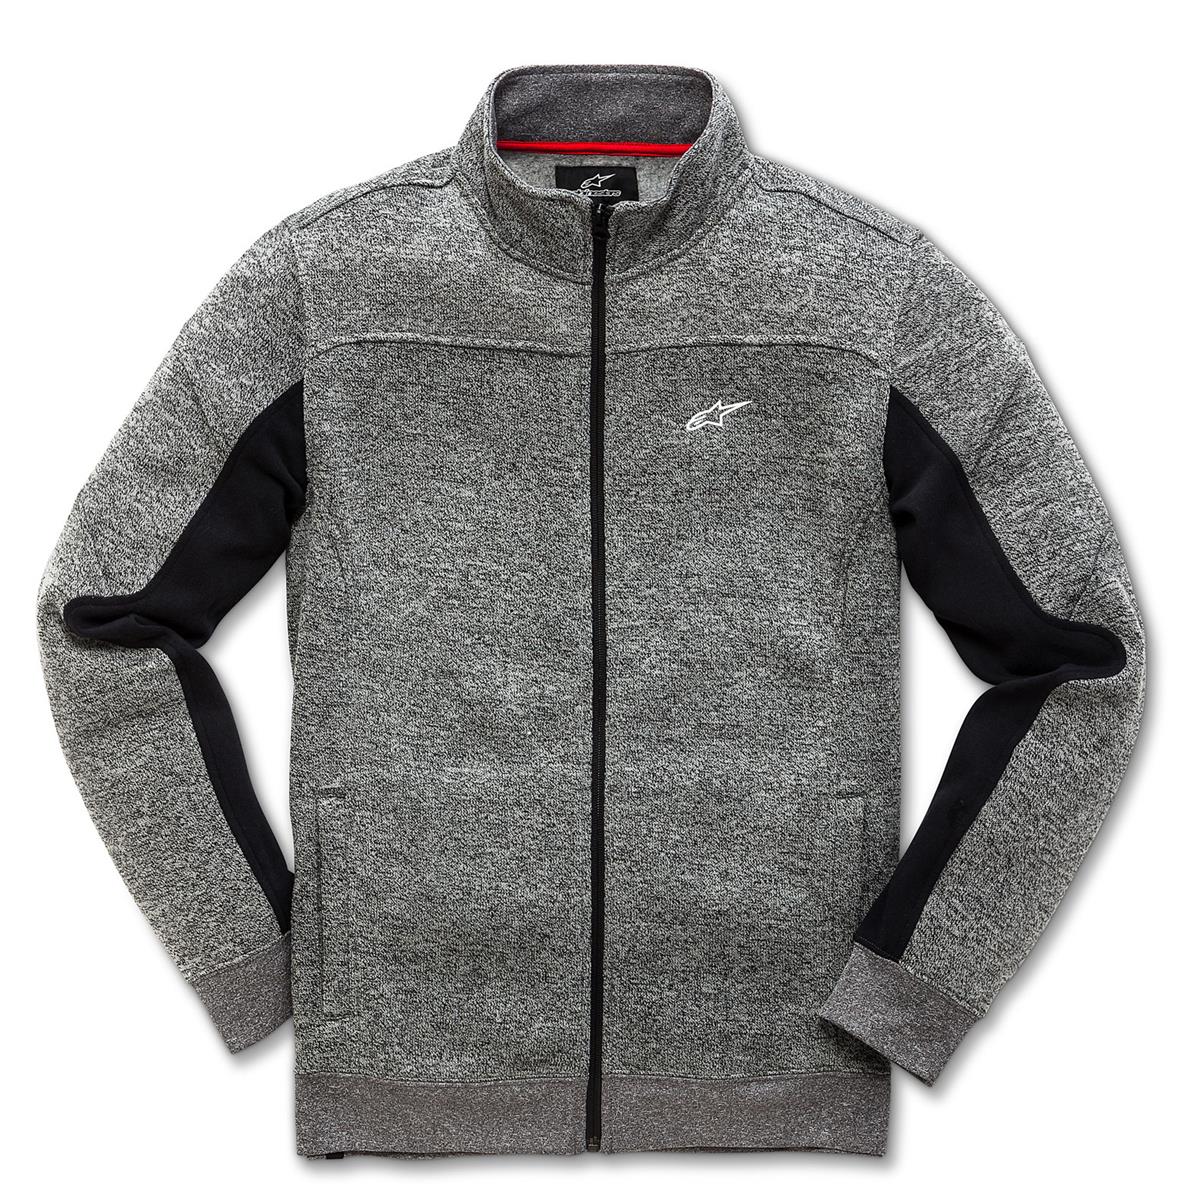 Alpinestars Giacca in Pile Lux Charcoal/Grey